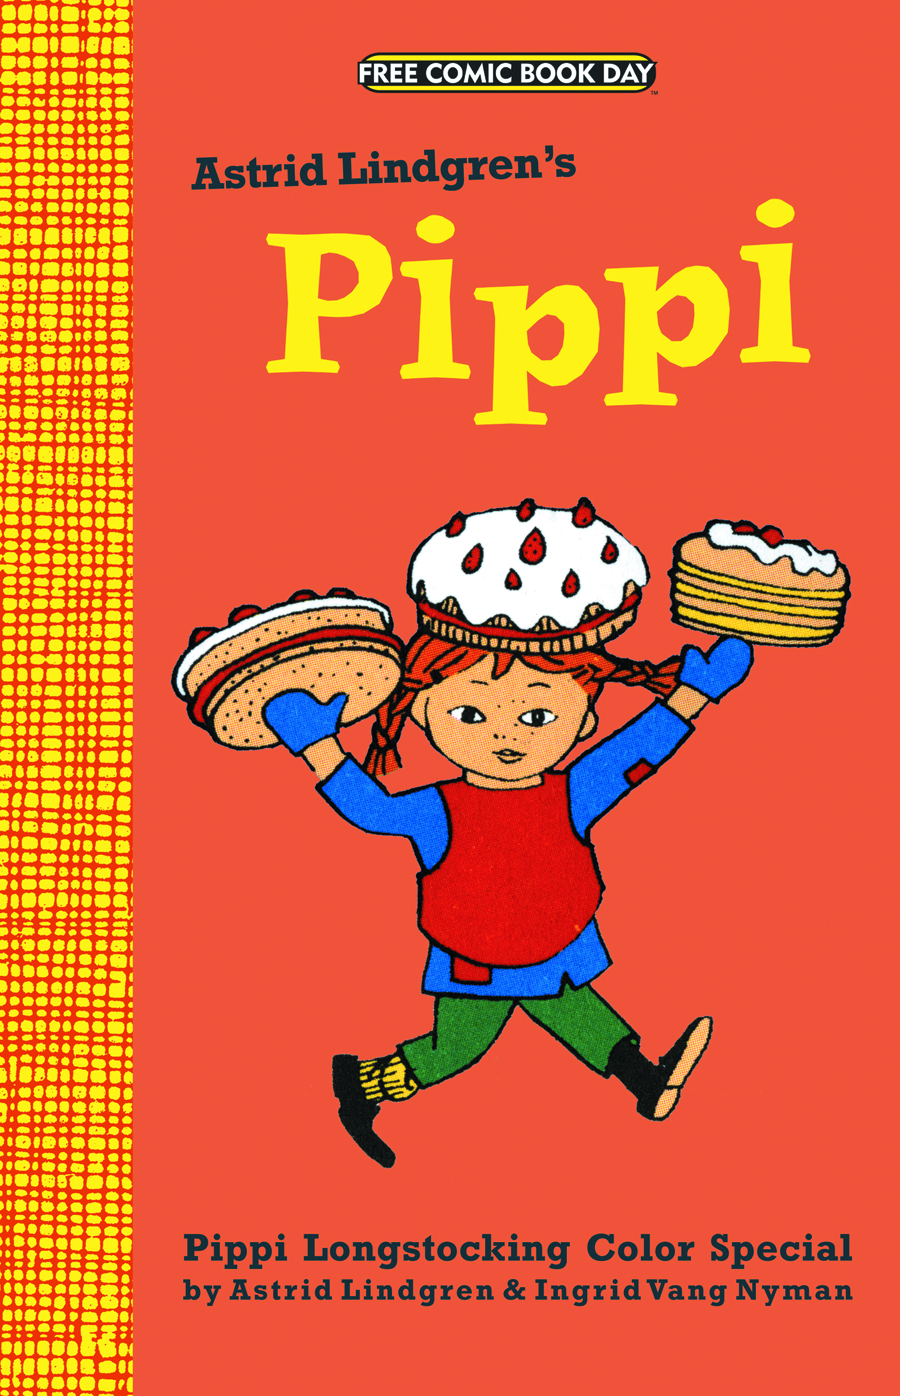 Free Comic Book Day - PIPPI LONGSTOCKING COLOR SPECIAL